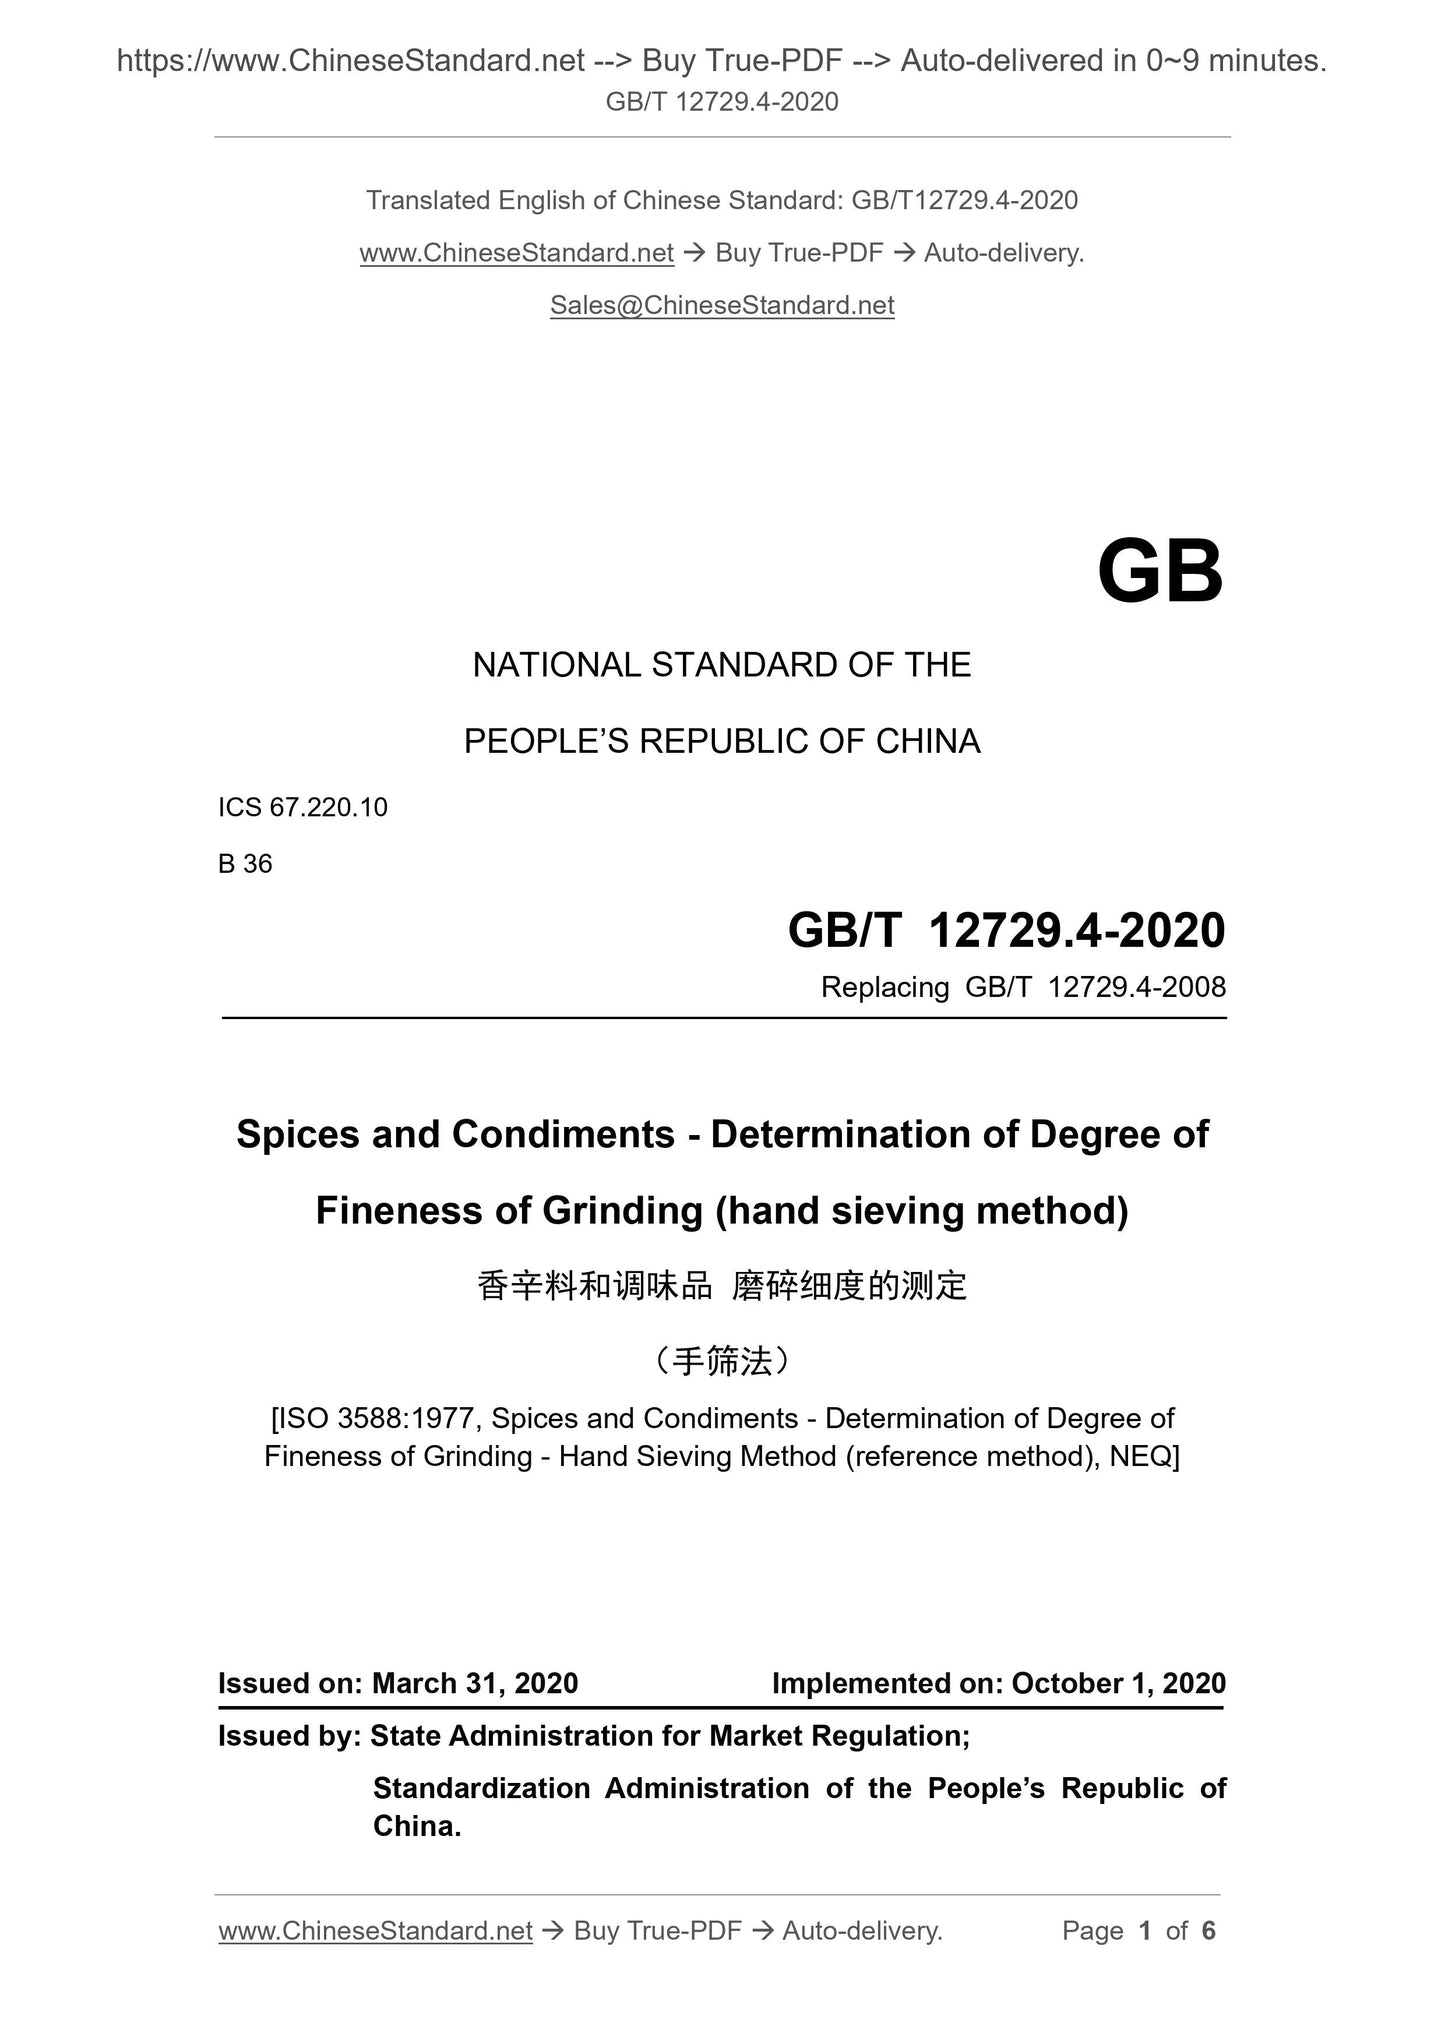 GB/T 12729.4-2020 Page 1